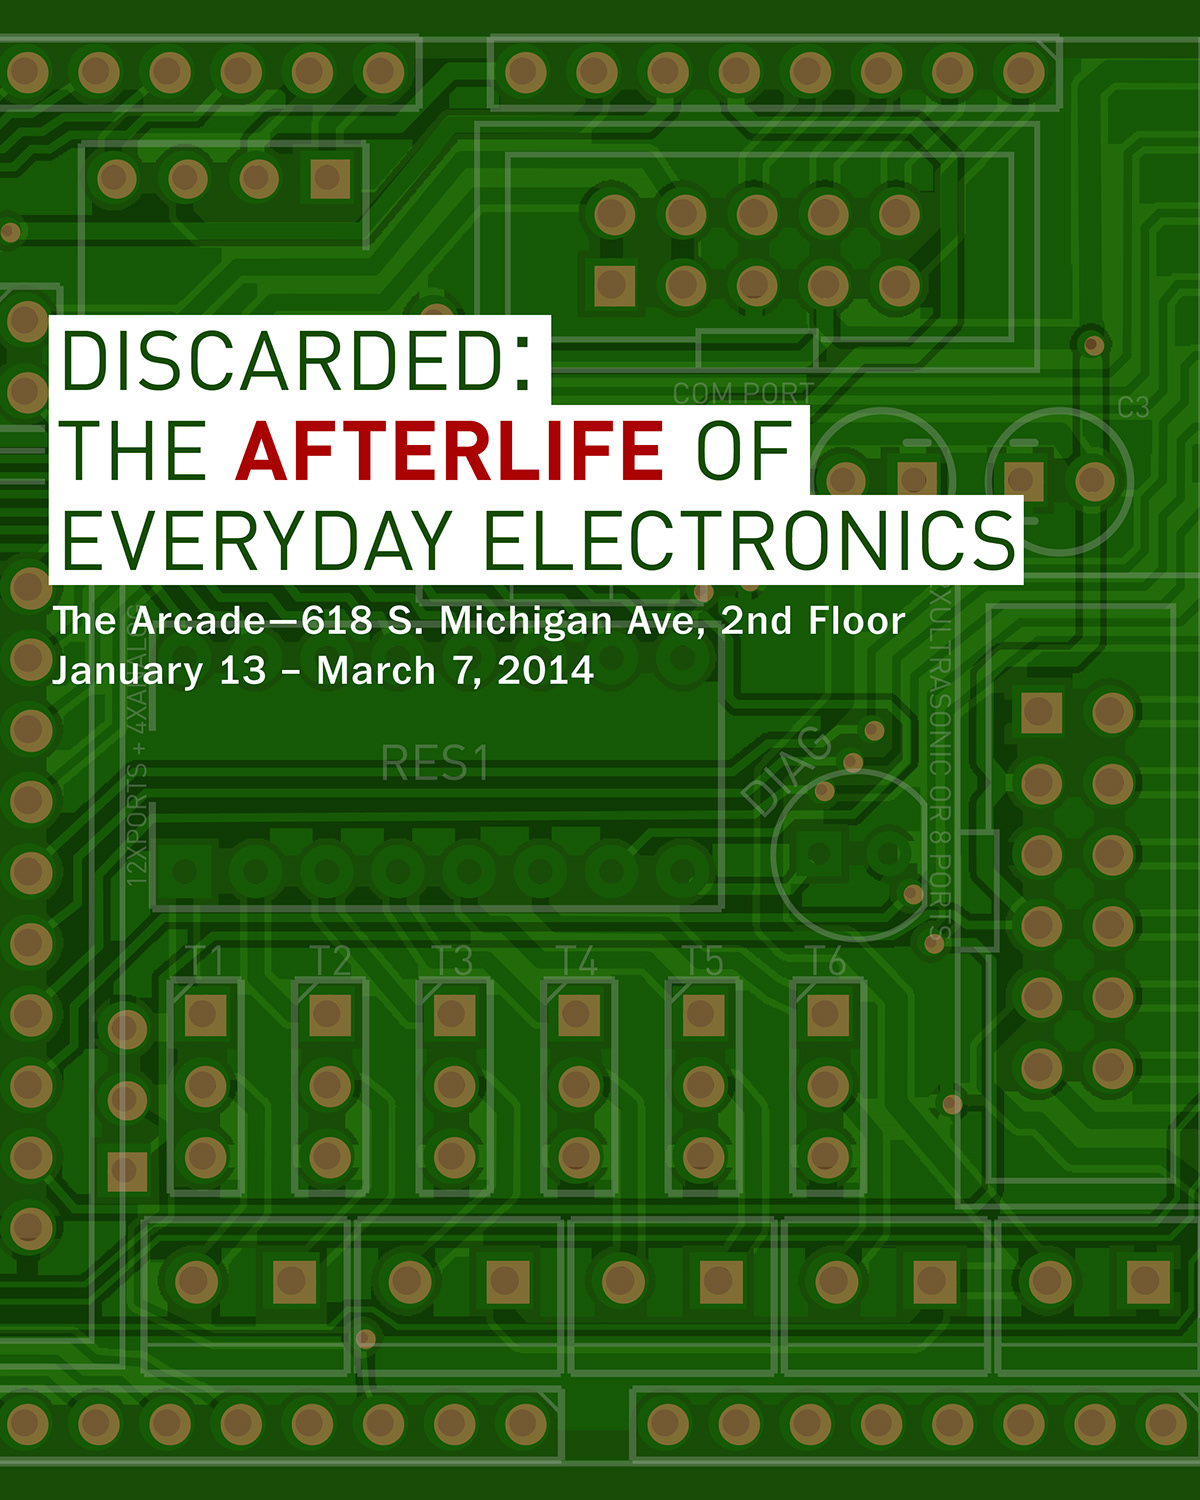 Discarded: The Afterlife of Everyday Electronics